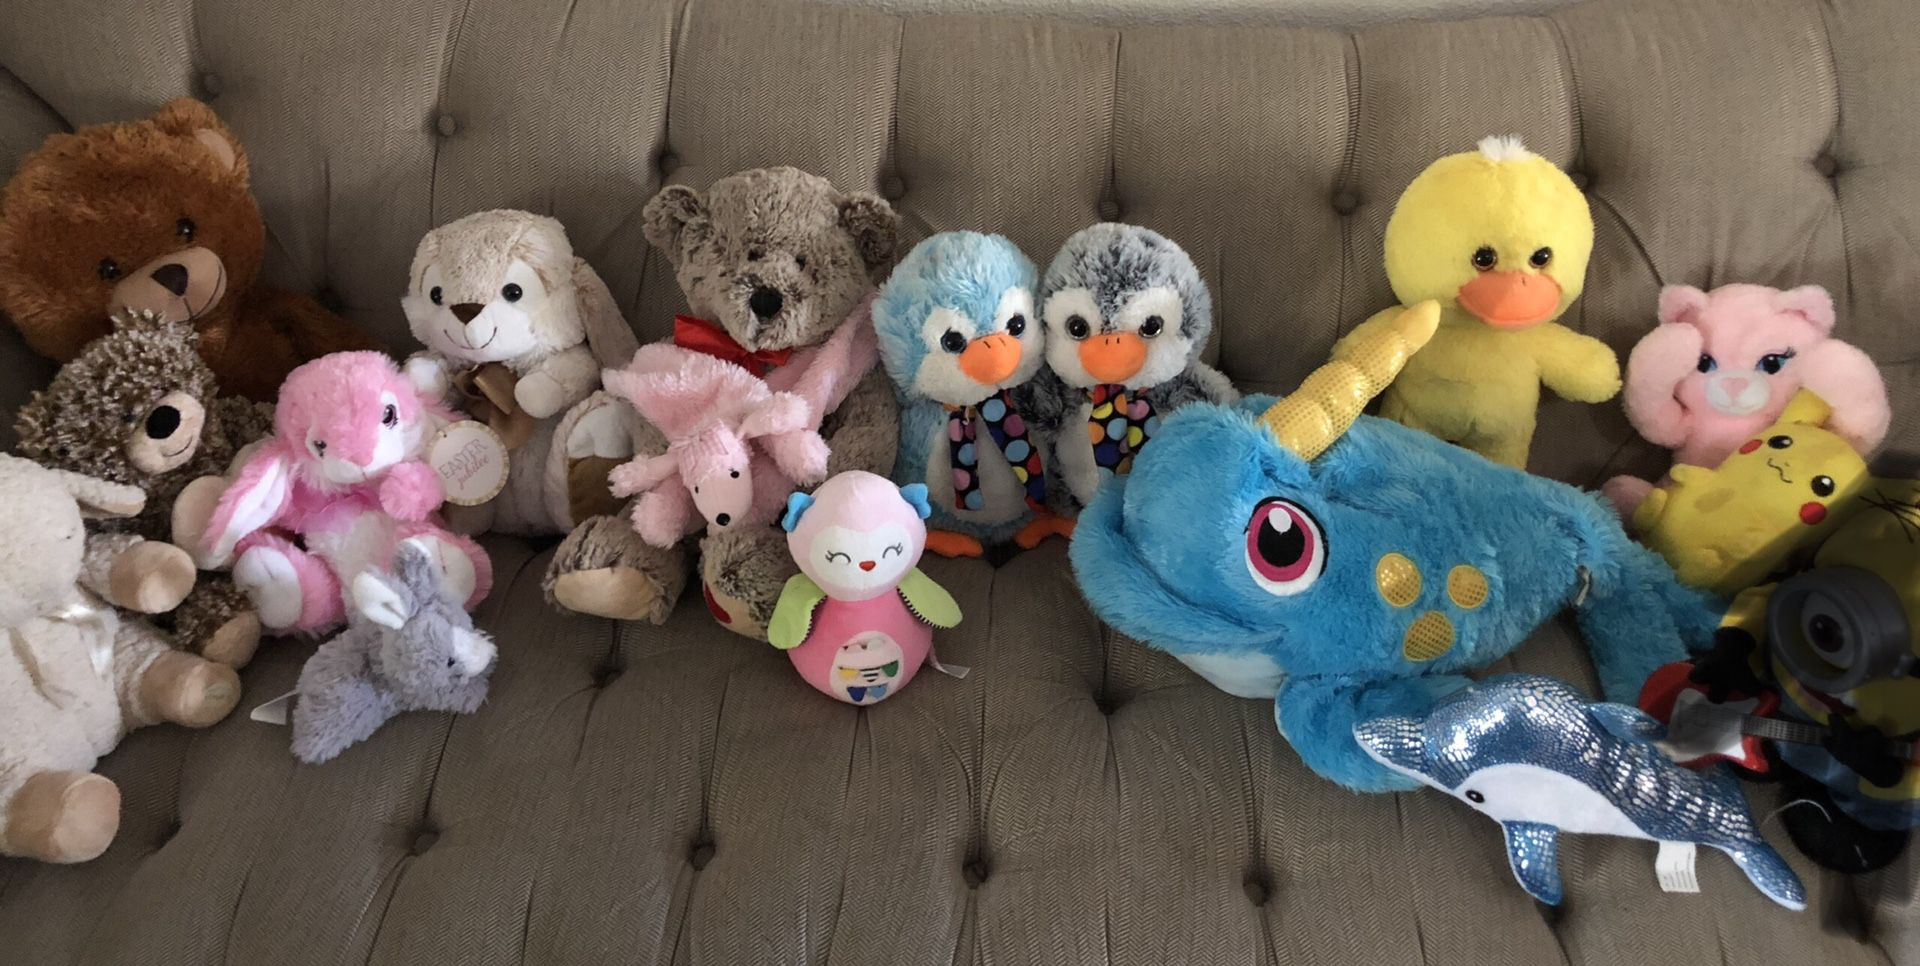 More FREE Stuffed Teddy Bears and Other Animals!